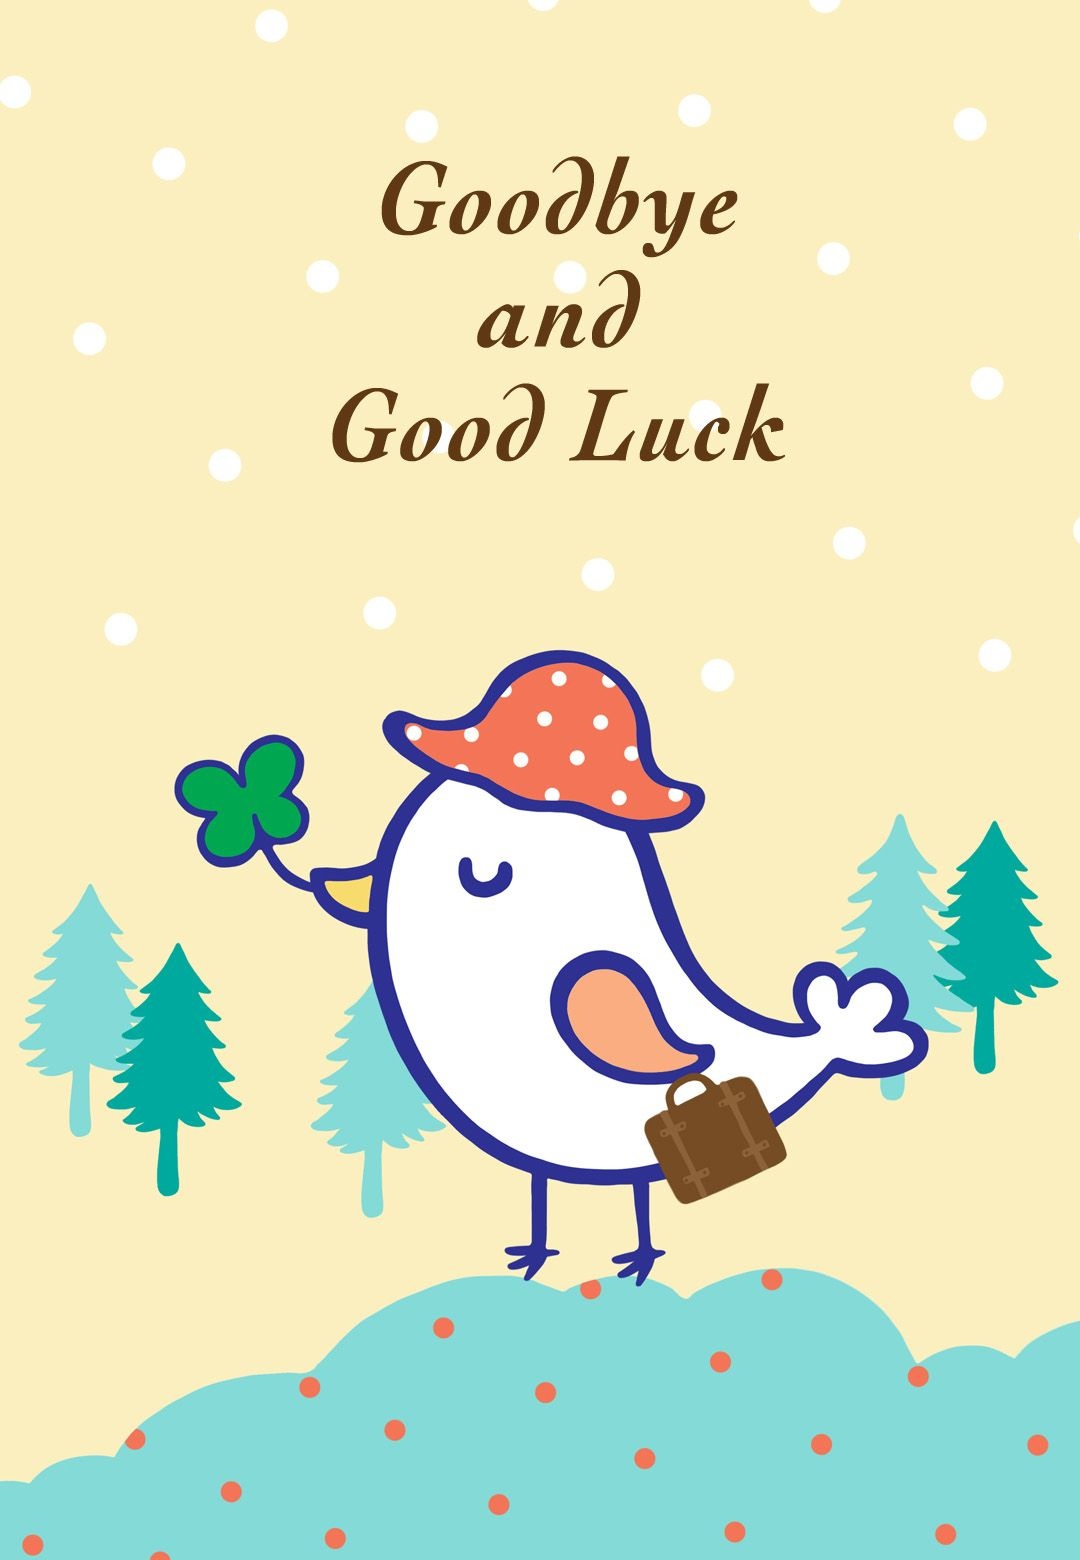 Free Printable Goodbye And Good Luck Greeting Card | Littlestar - Free Printable Farewell Card For Coworker